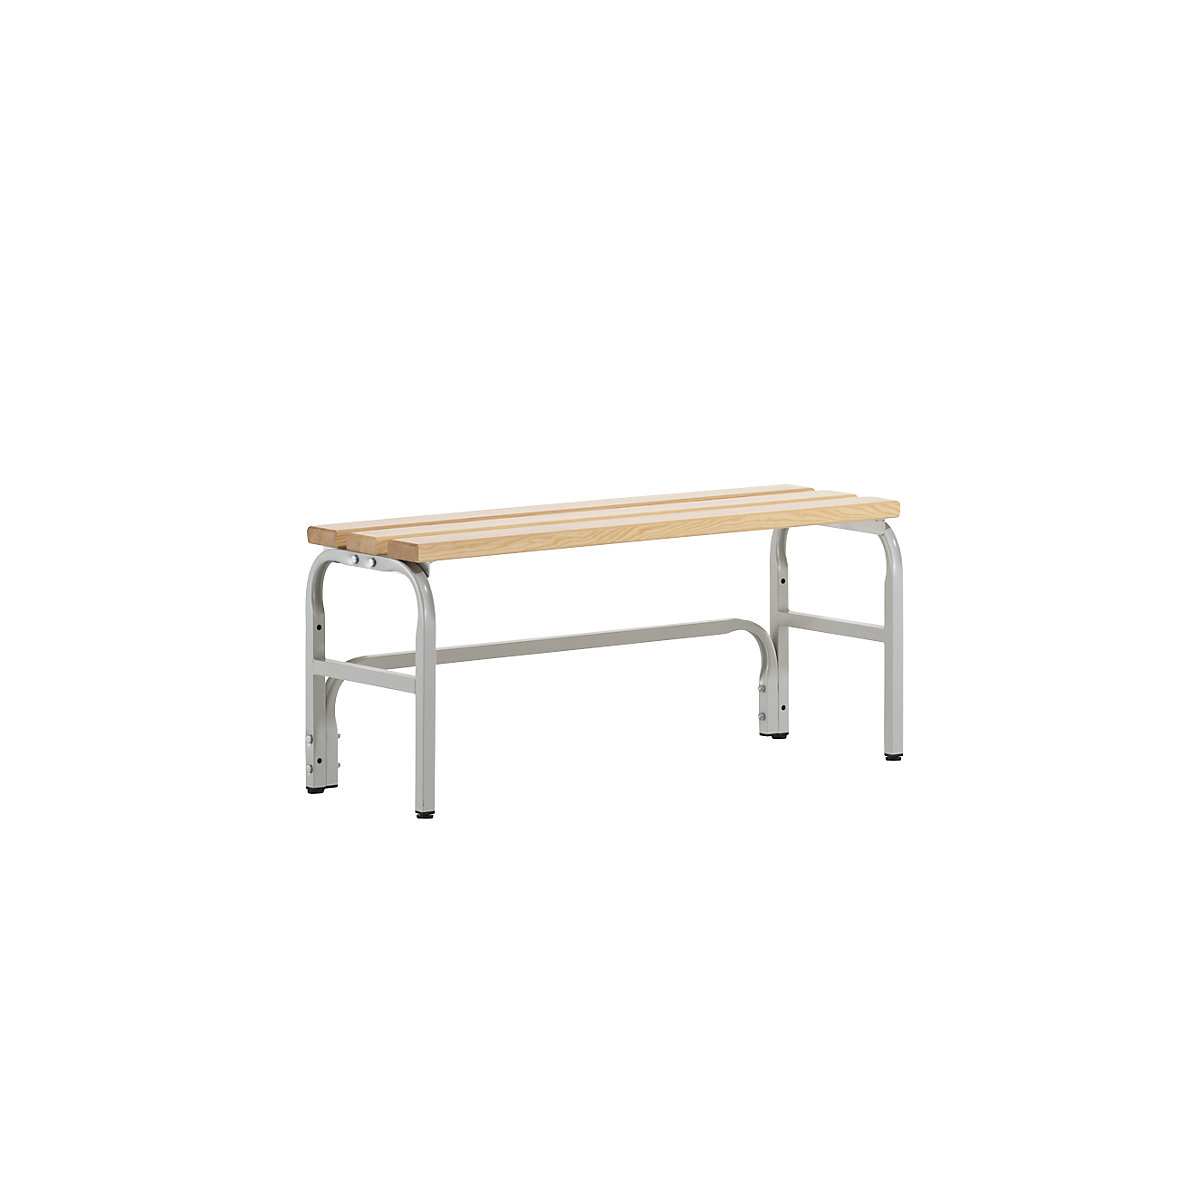 Cloakroom bench - Sypro